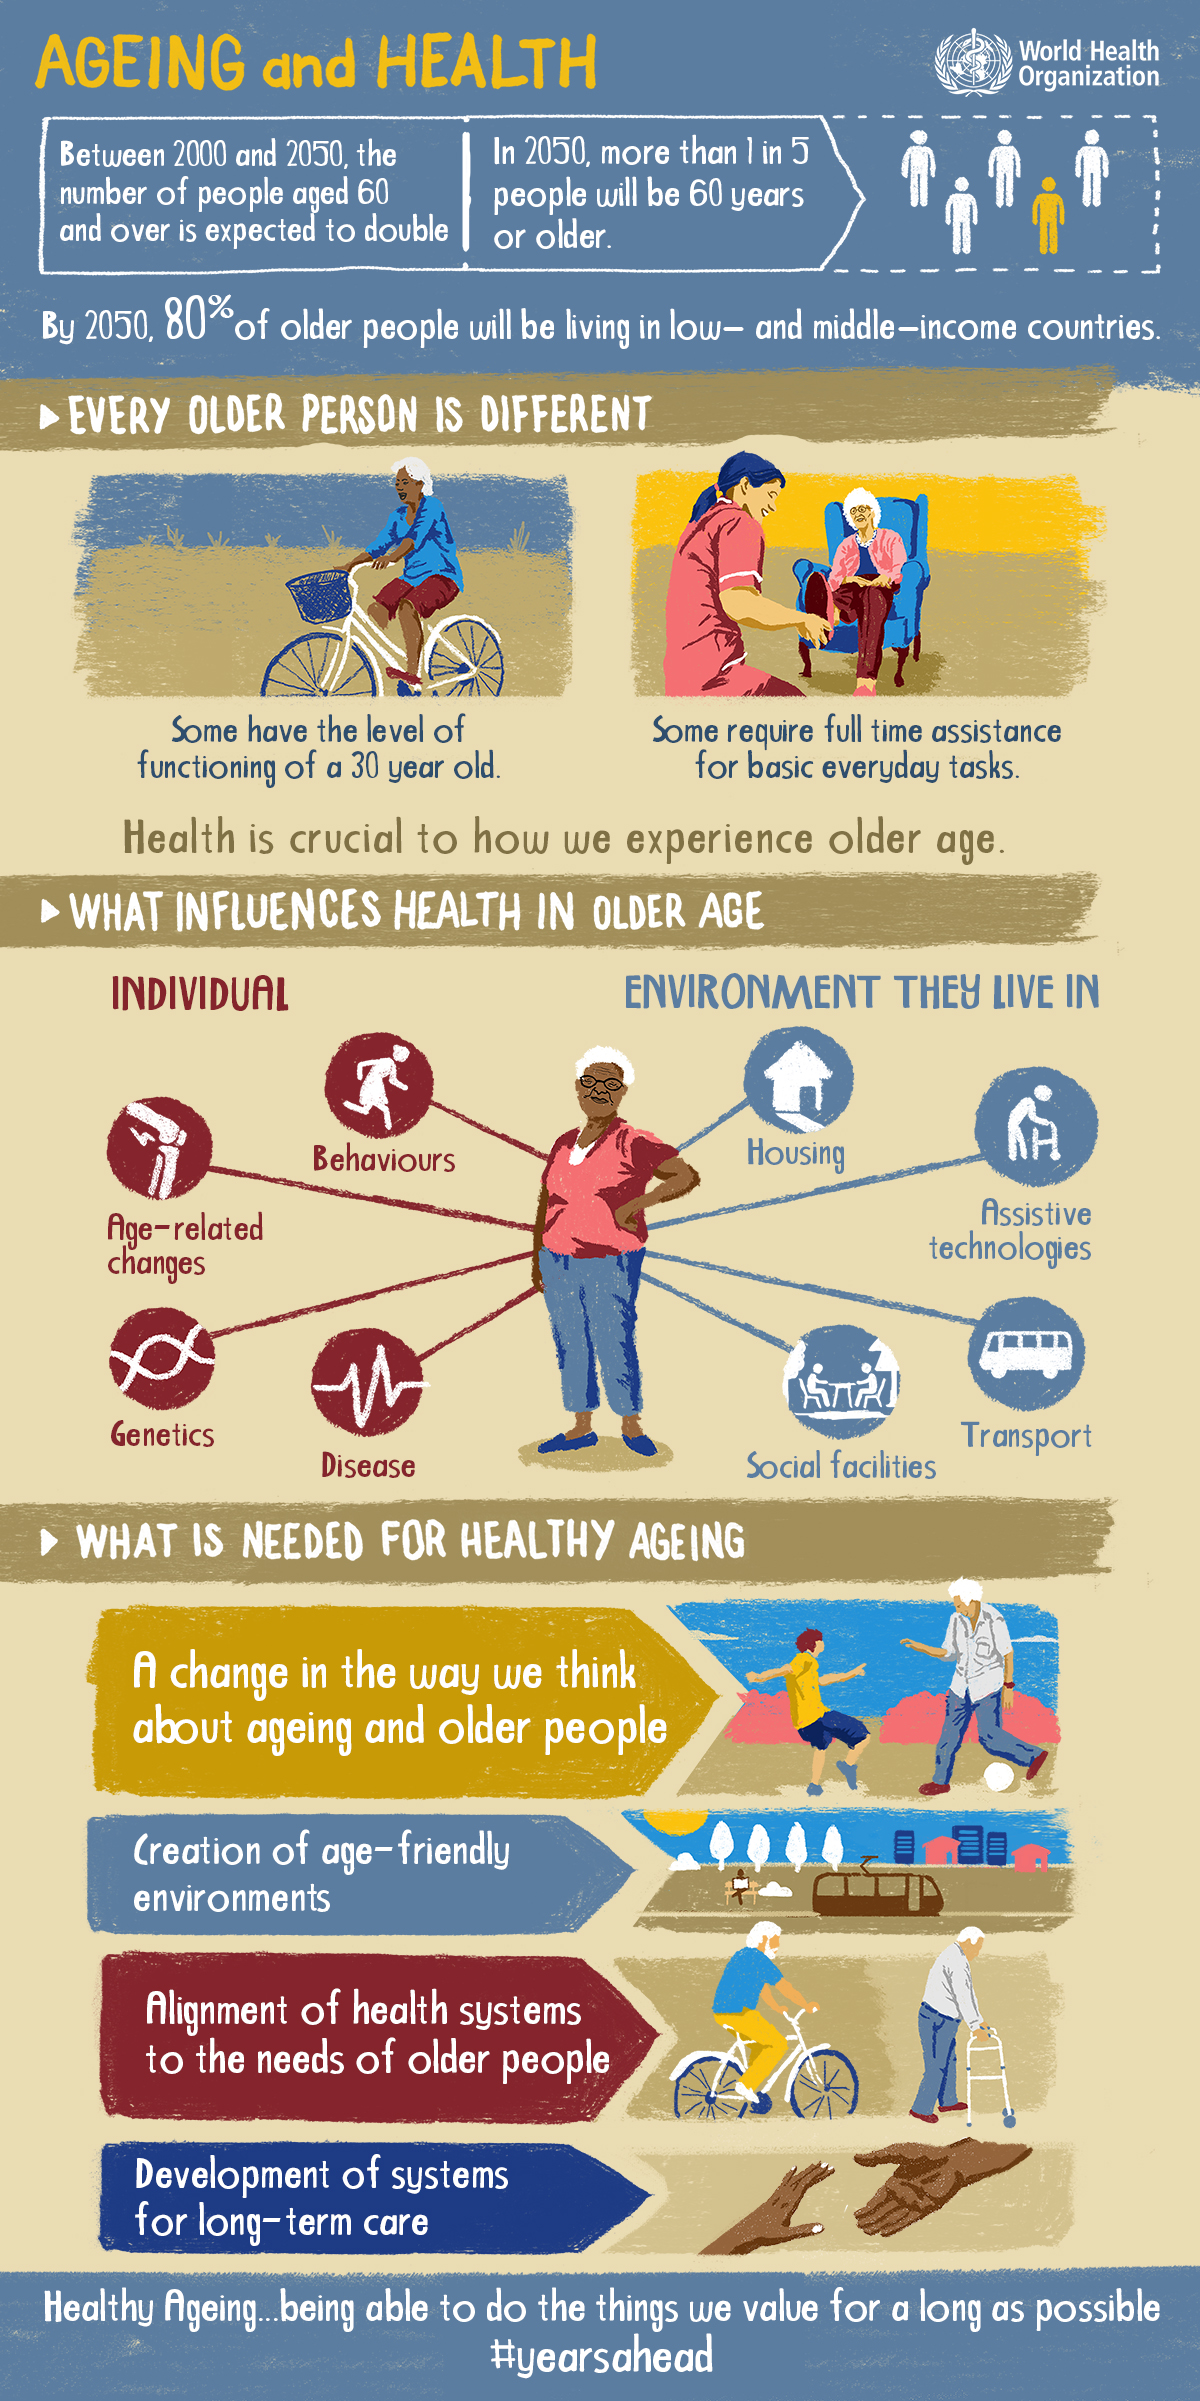 Healthy aging resources